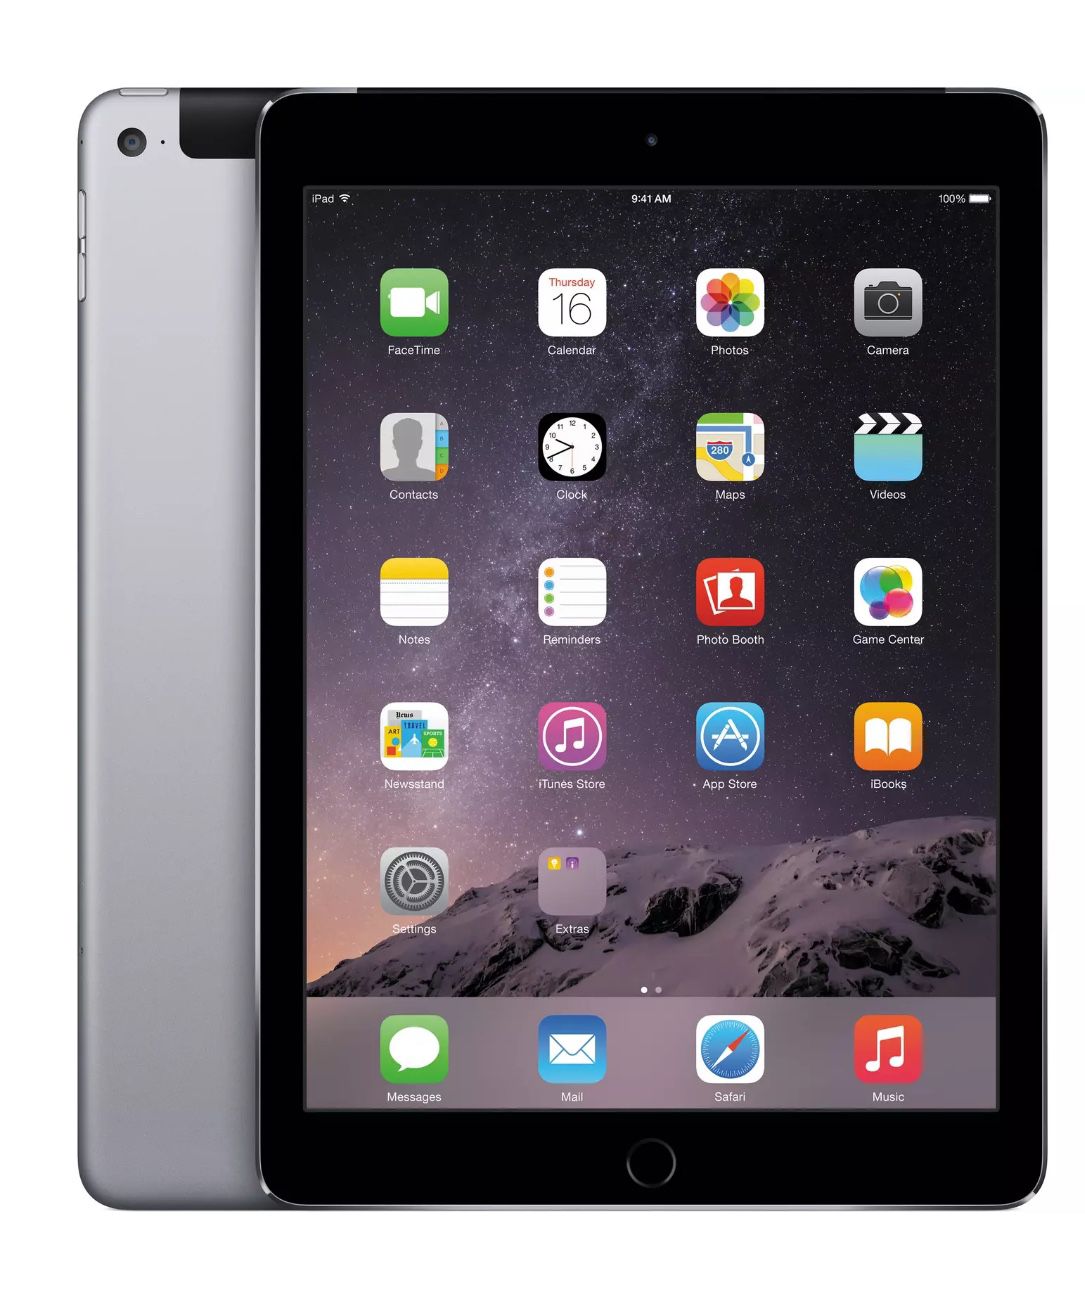 Apple iPad 5th Gen - 32GB Wi-Fi Only Space Gray